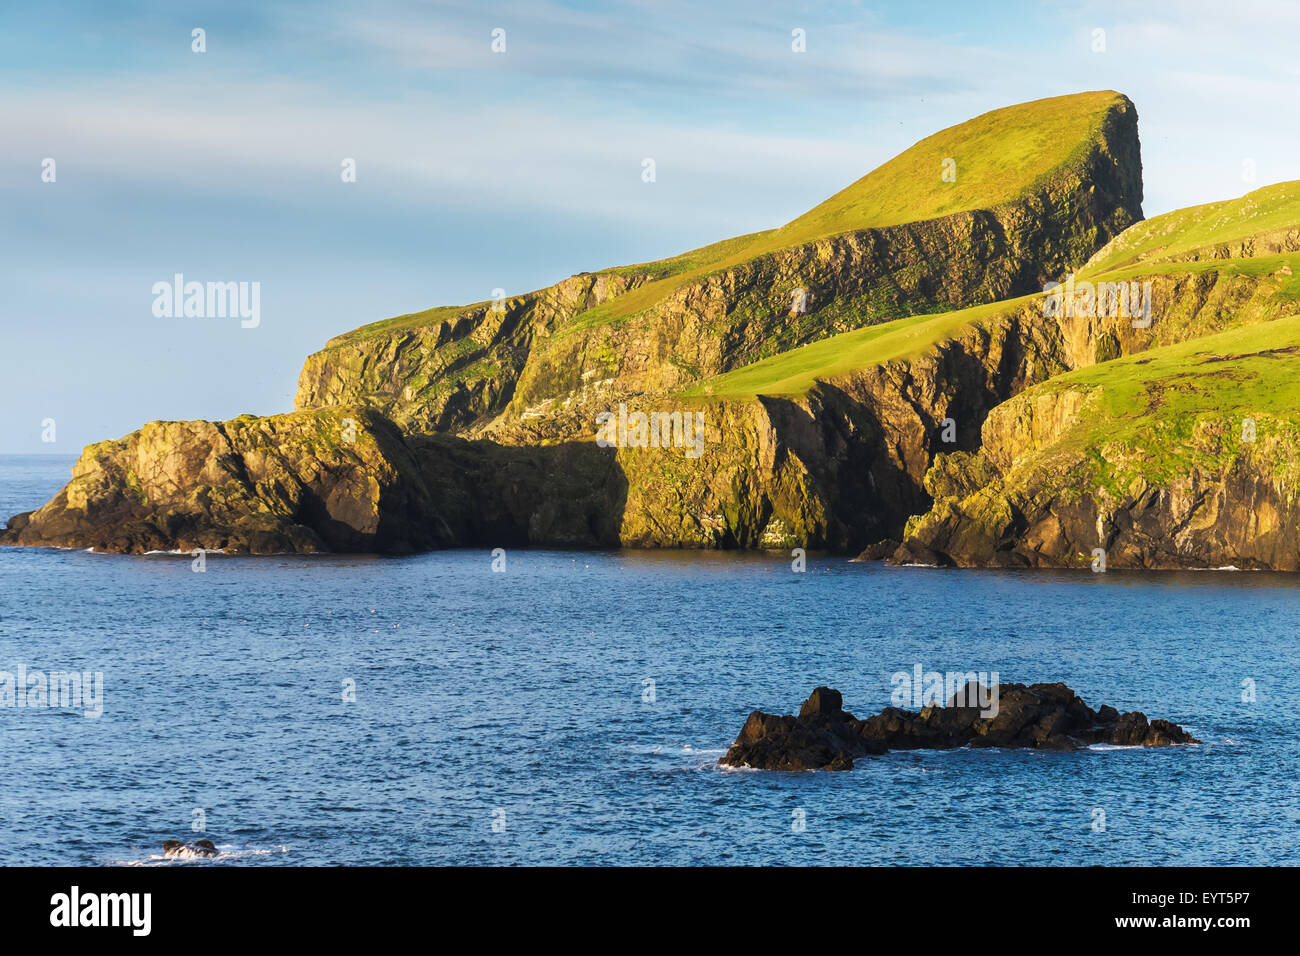 An image of Sheep rock in Fair isle, an island in the Atlantic ocean between Orkney and Shetland Stock Photo